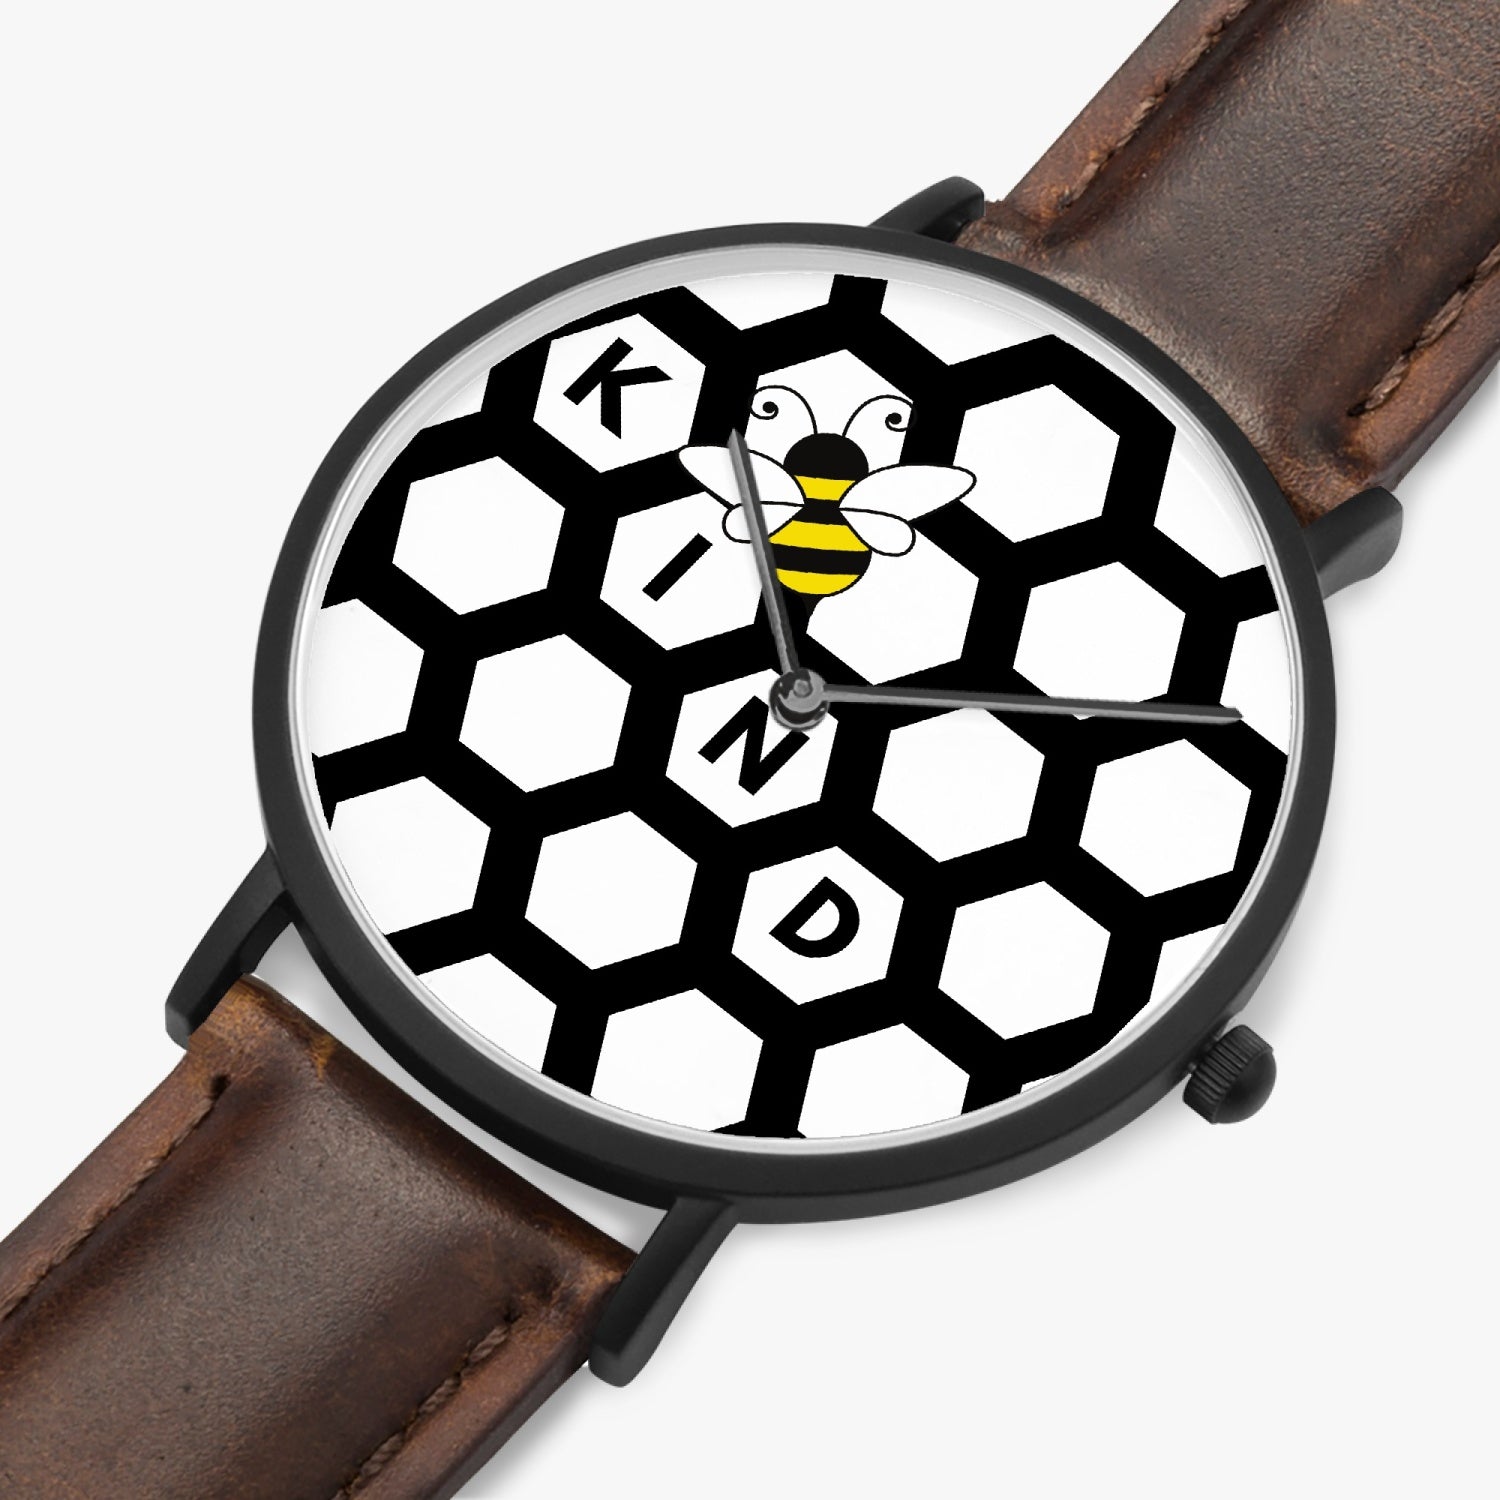 Be Kind Ultra-Thin Leather Strap Quartz Watch - The Kindness Cause